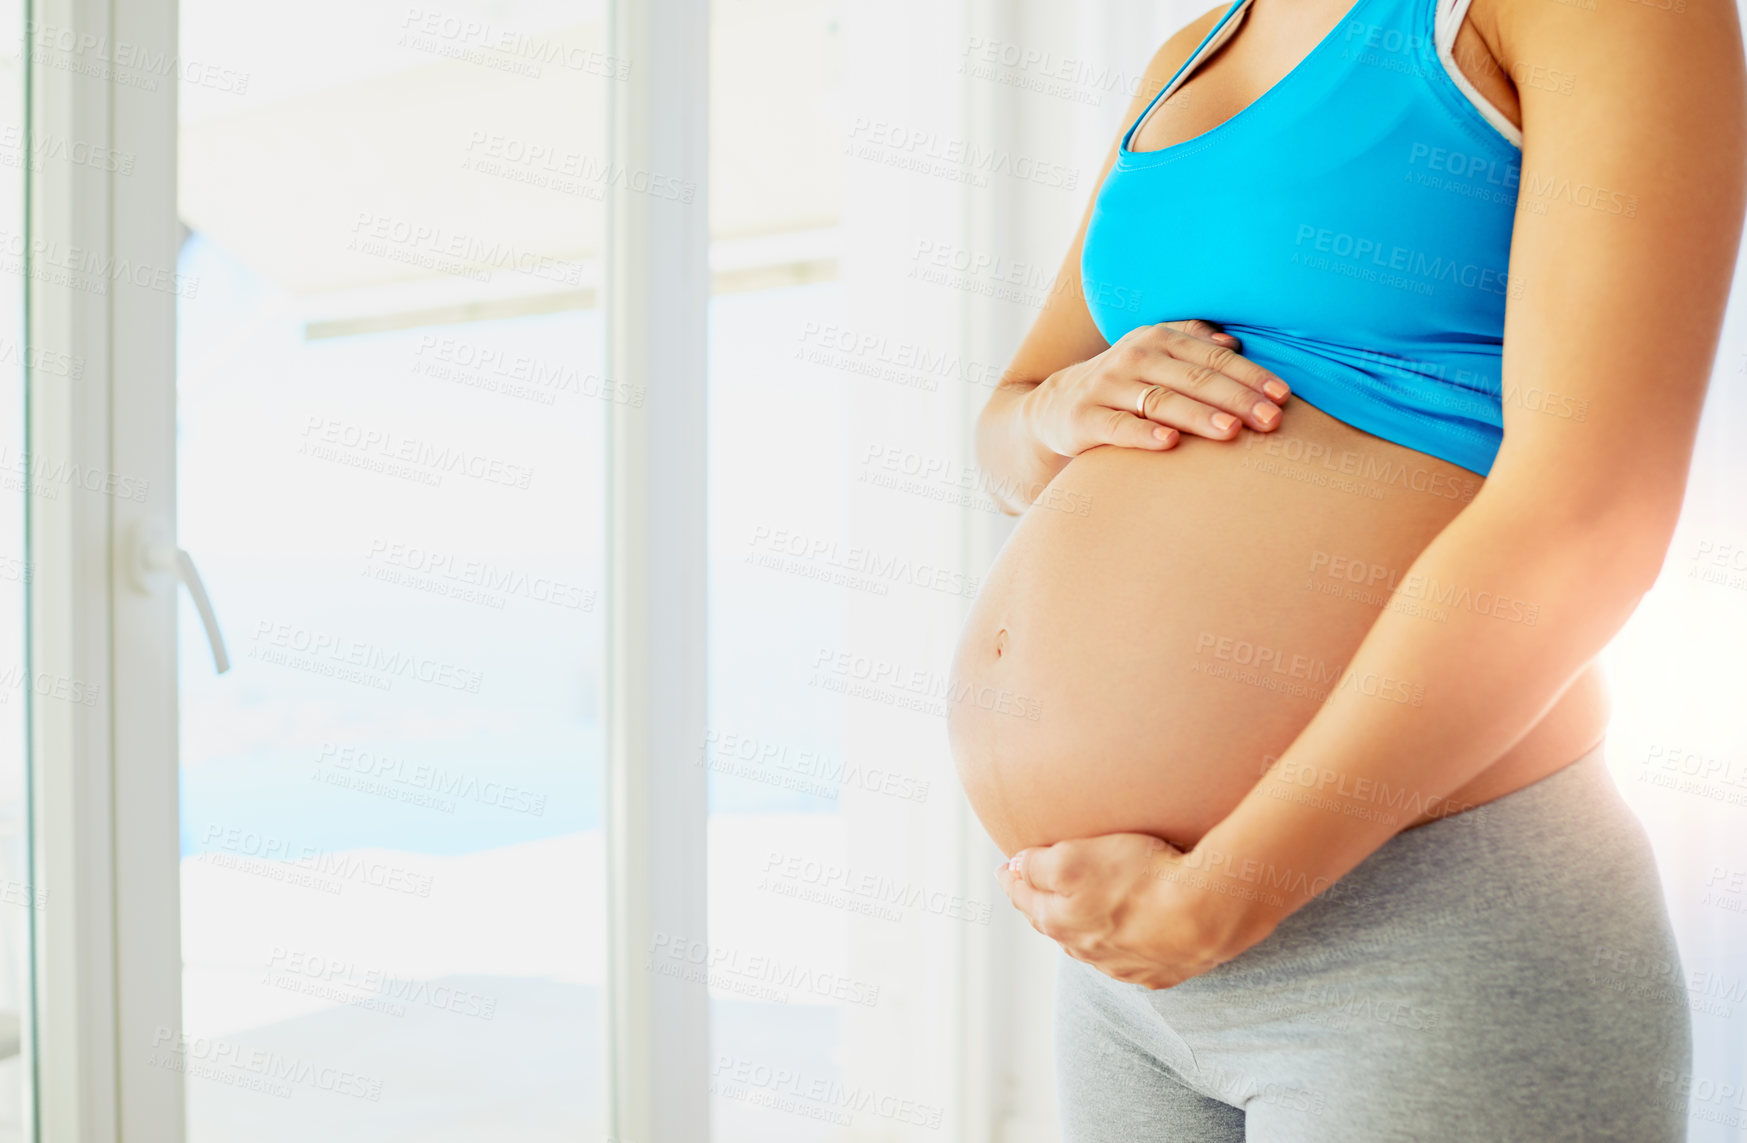 Buy stock photo Cropped shot of a pregnant woman holding her bare belly at home